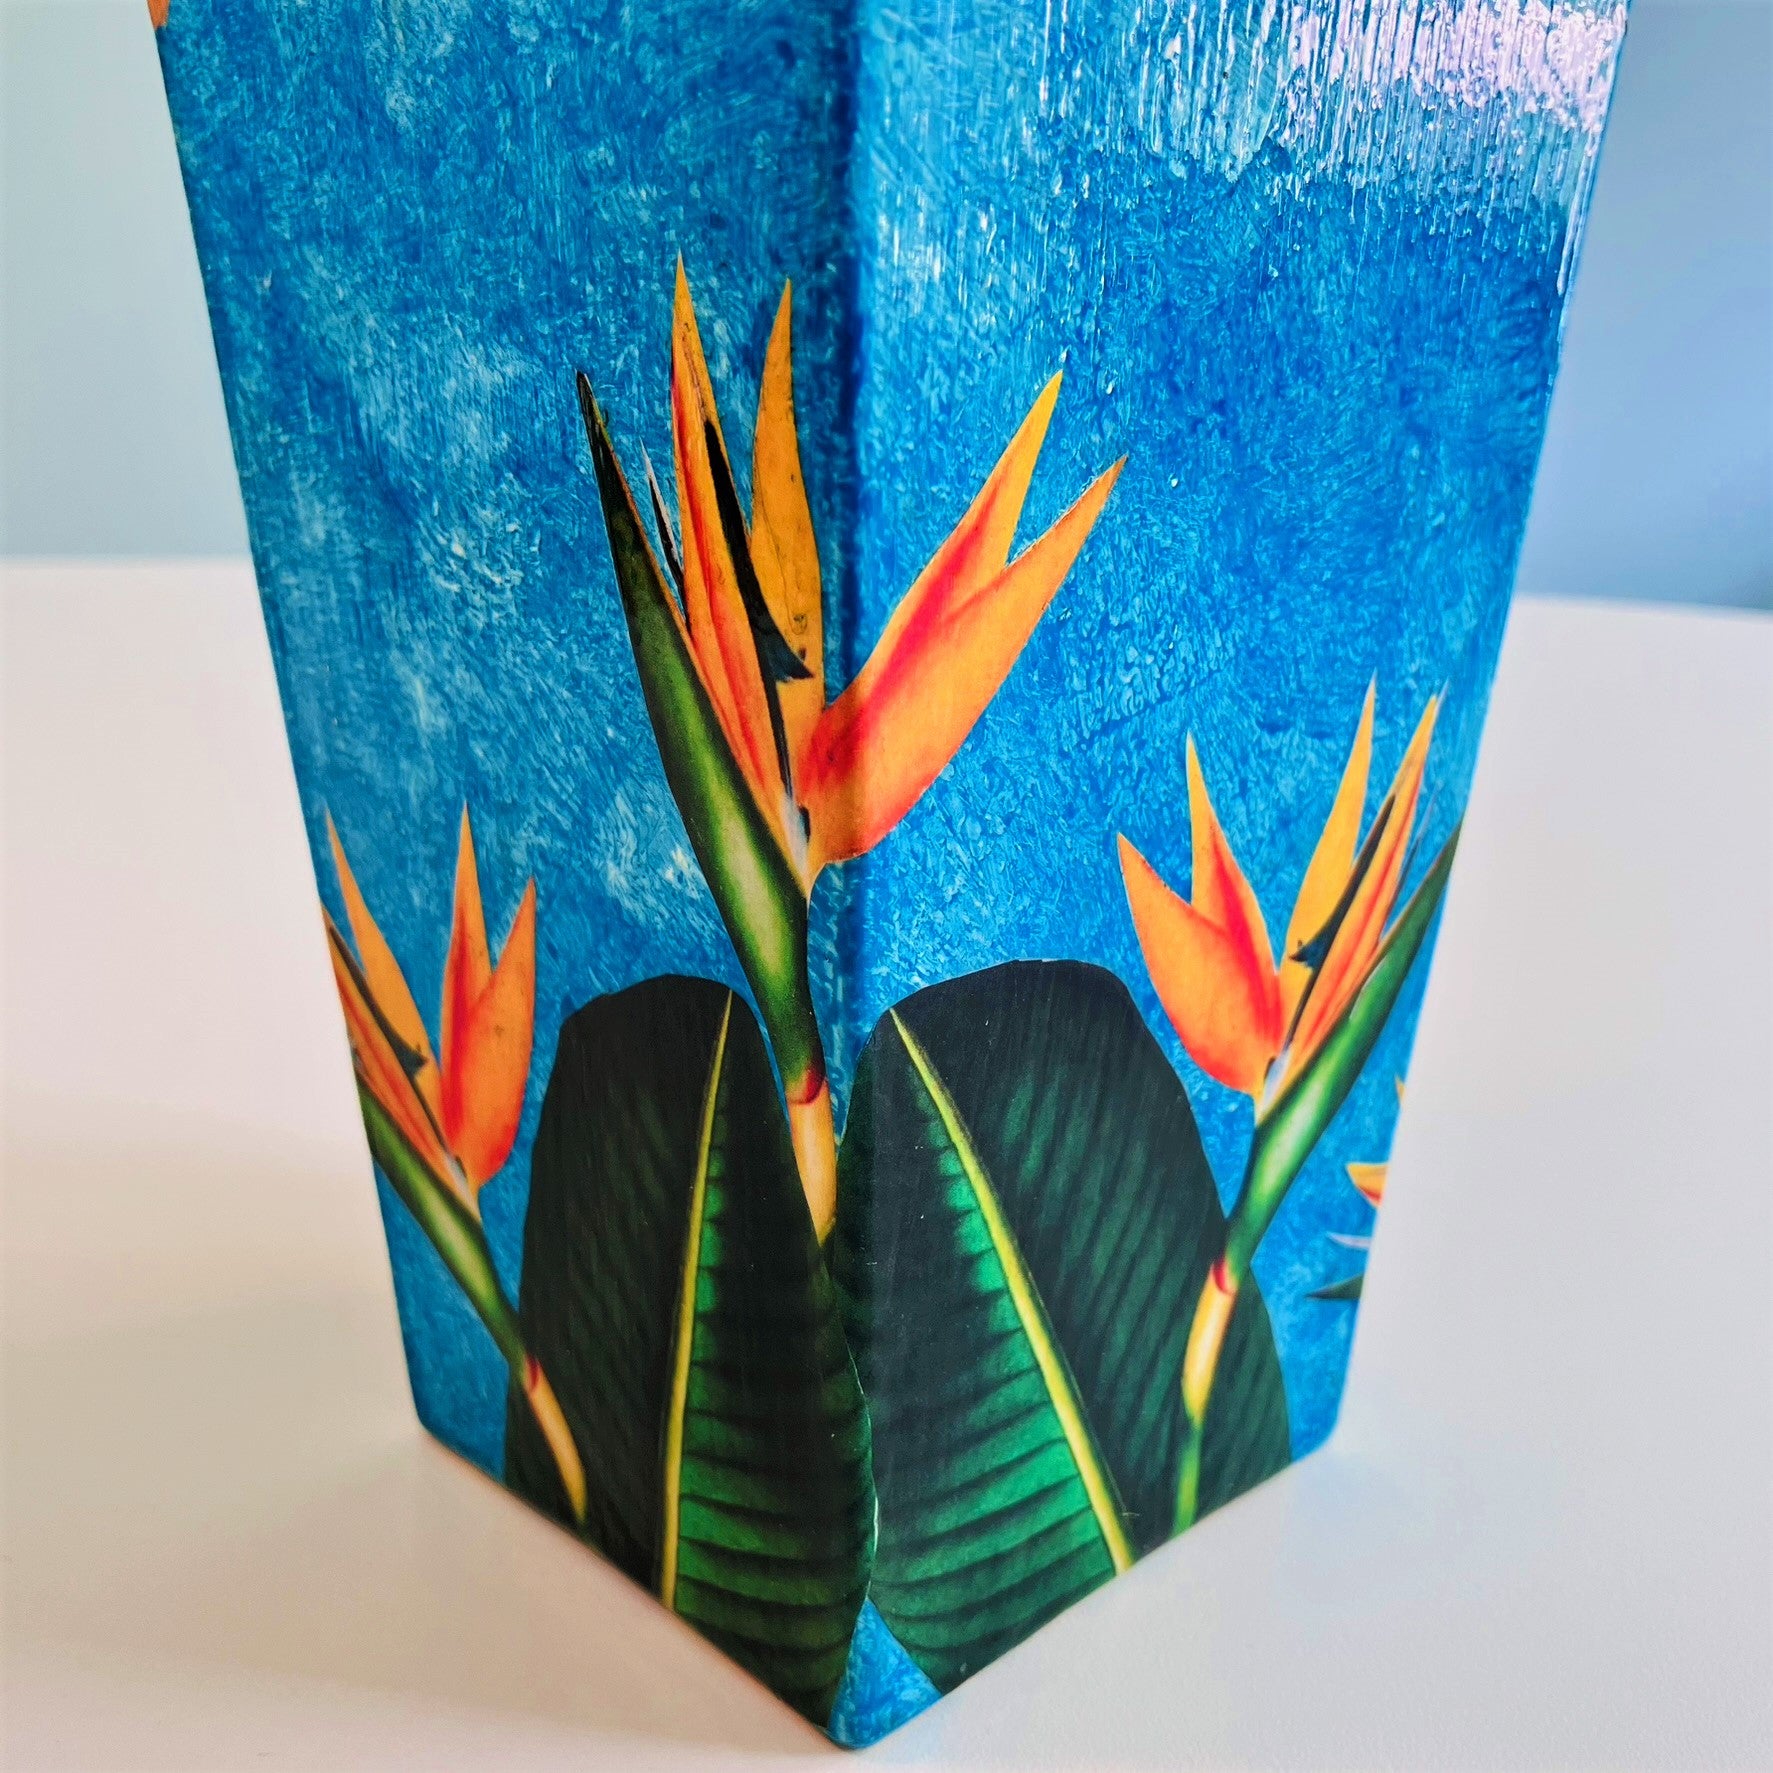 "Strelitzia" Flower Vase by House of Frisson, featuring strelitzia flowers and leaves, on a blue and golden background. Showing detail of the flowers.